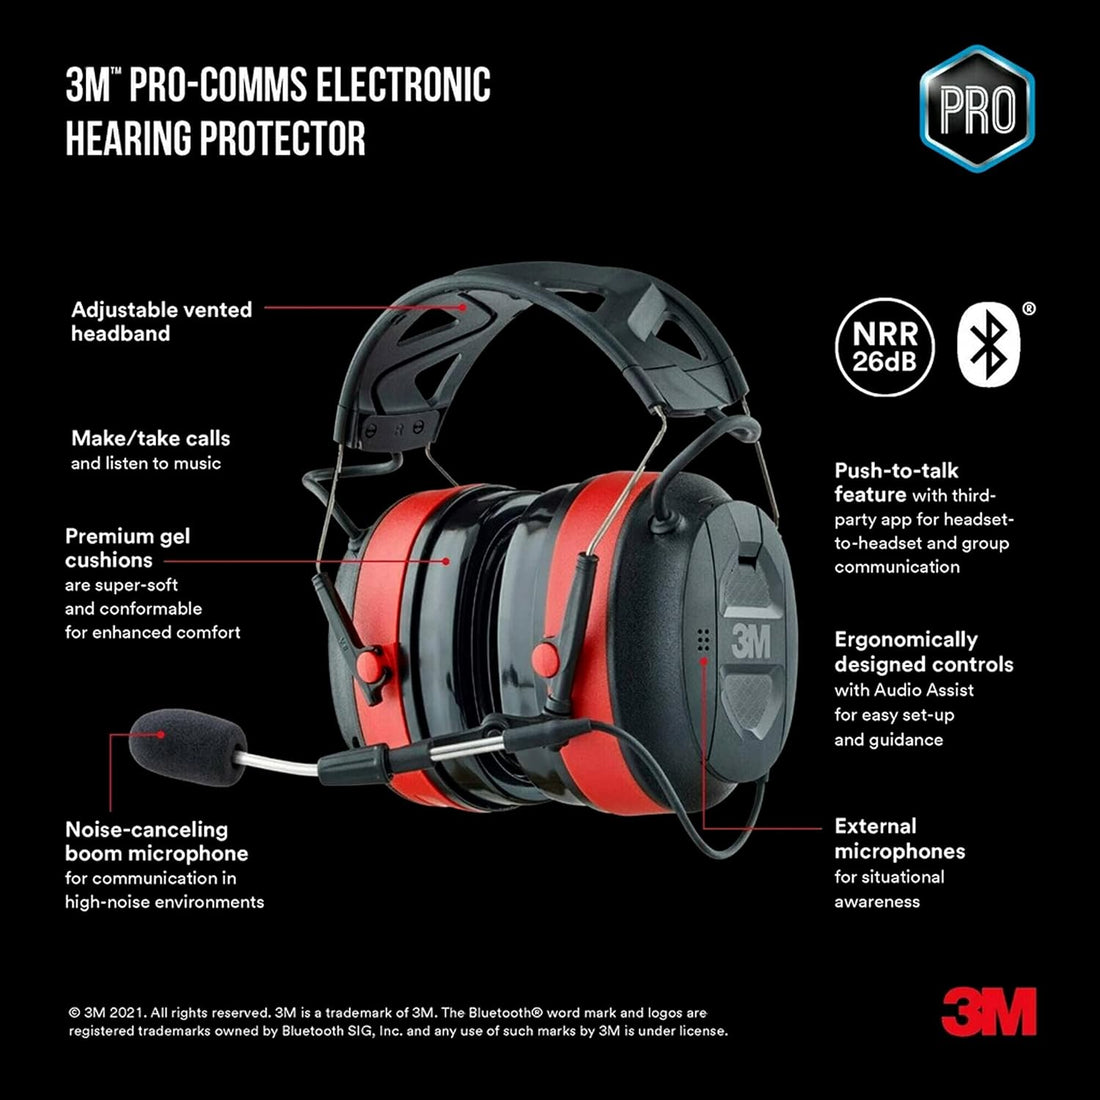 3M Pro-Comms Electronic Hearing Protection with Bluetooth Wireless Technology and External Microphones, NRR 26 dB